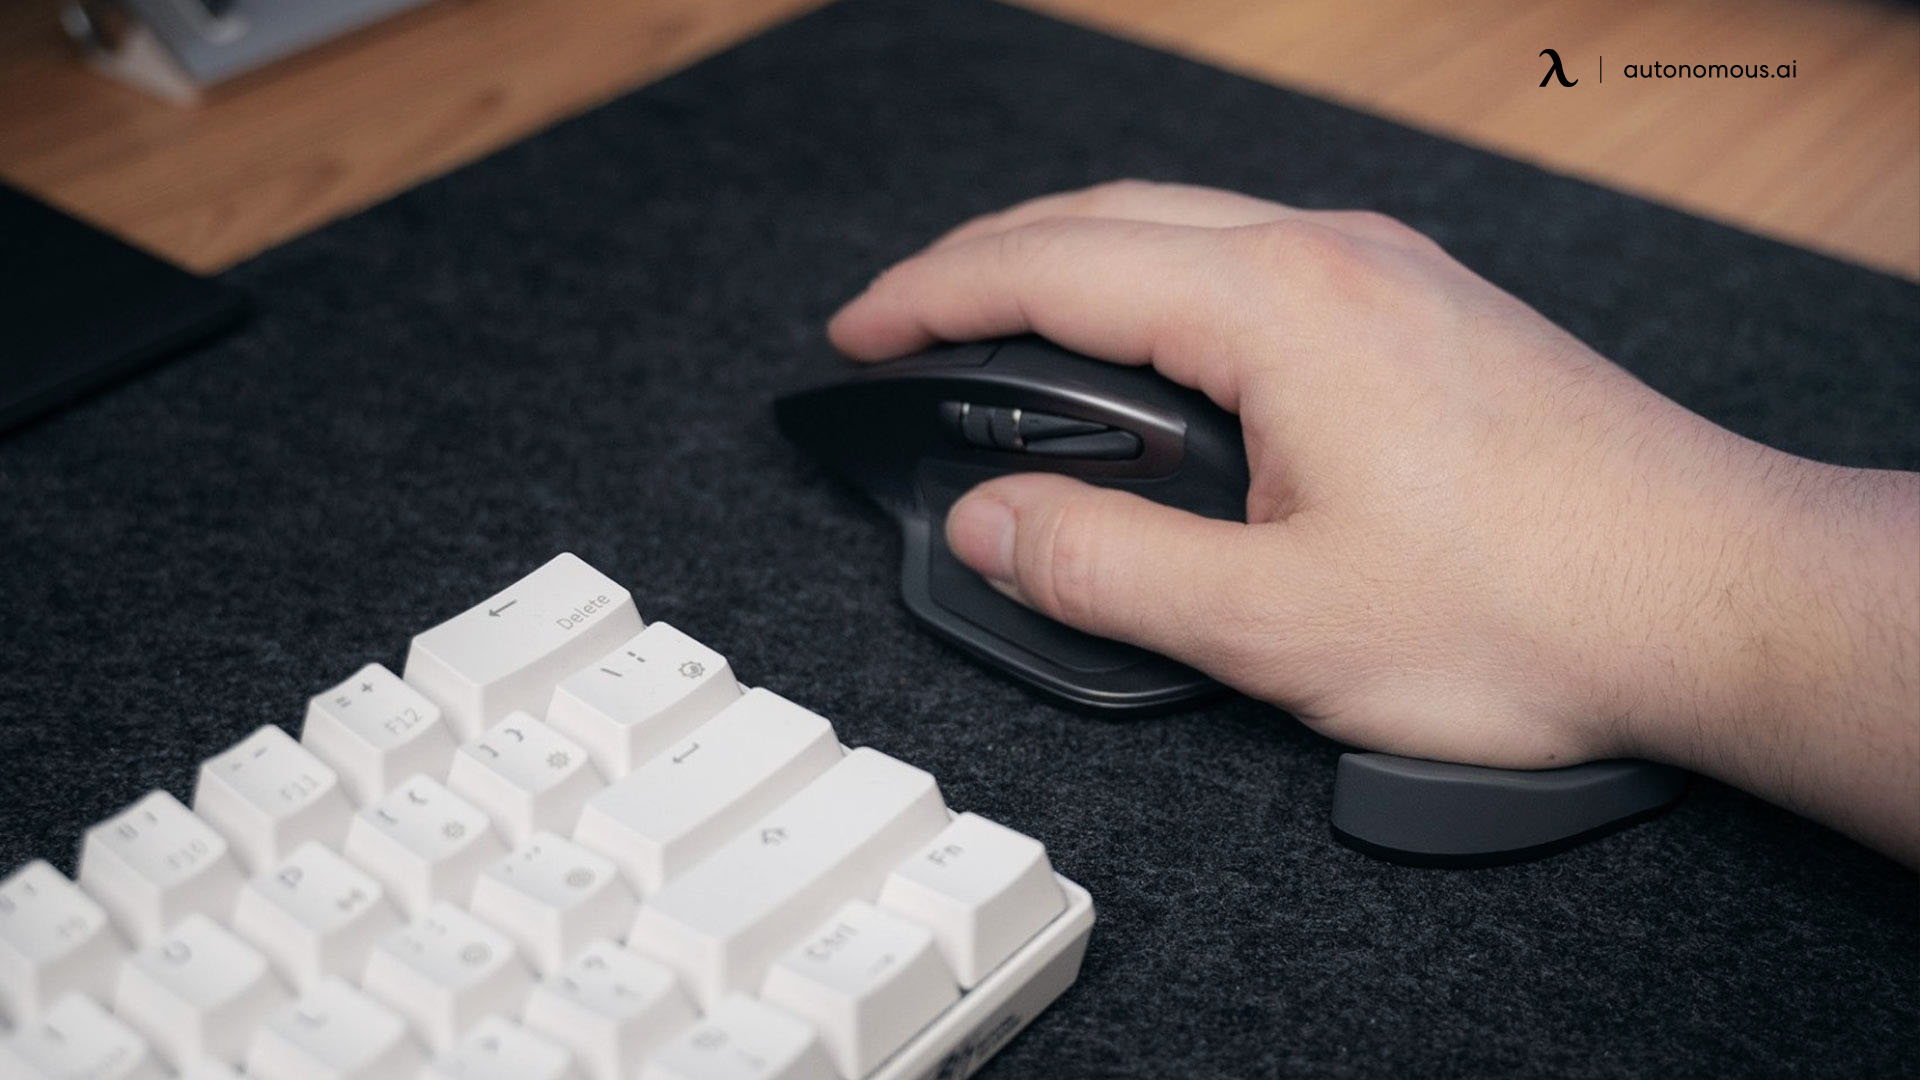 How to Use Your Wrist Rest Correctly